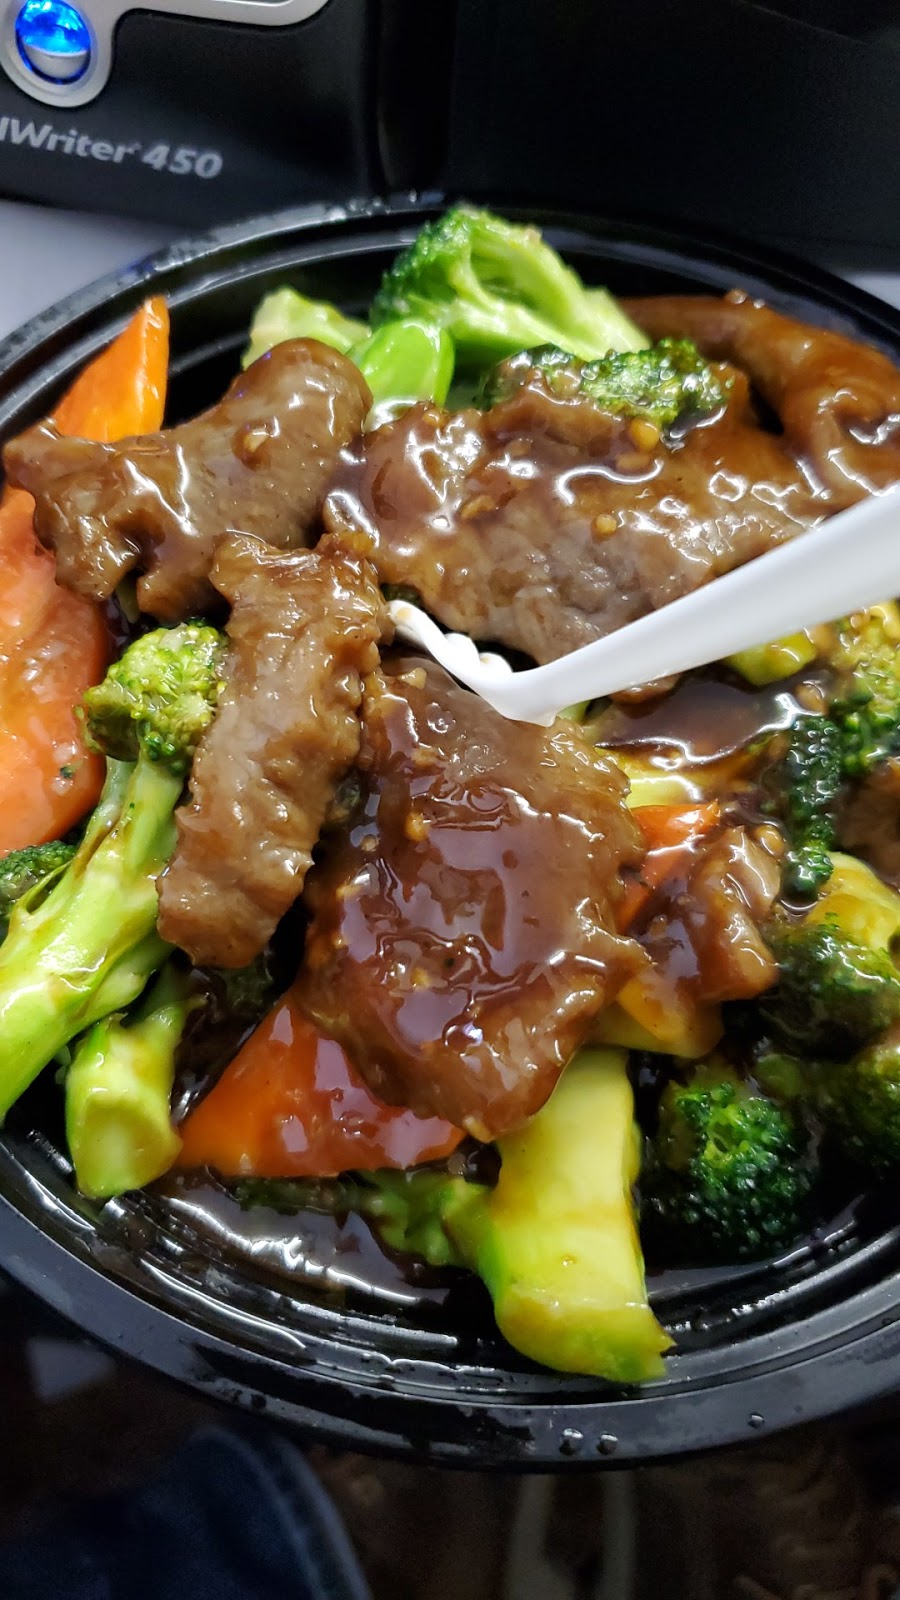 Liberty Garden Chinese Restaurant | 1508 Queen St W, Toronto, ON M6R 1A4, Canada | Phone: (416) 588-1508